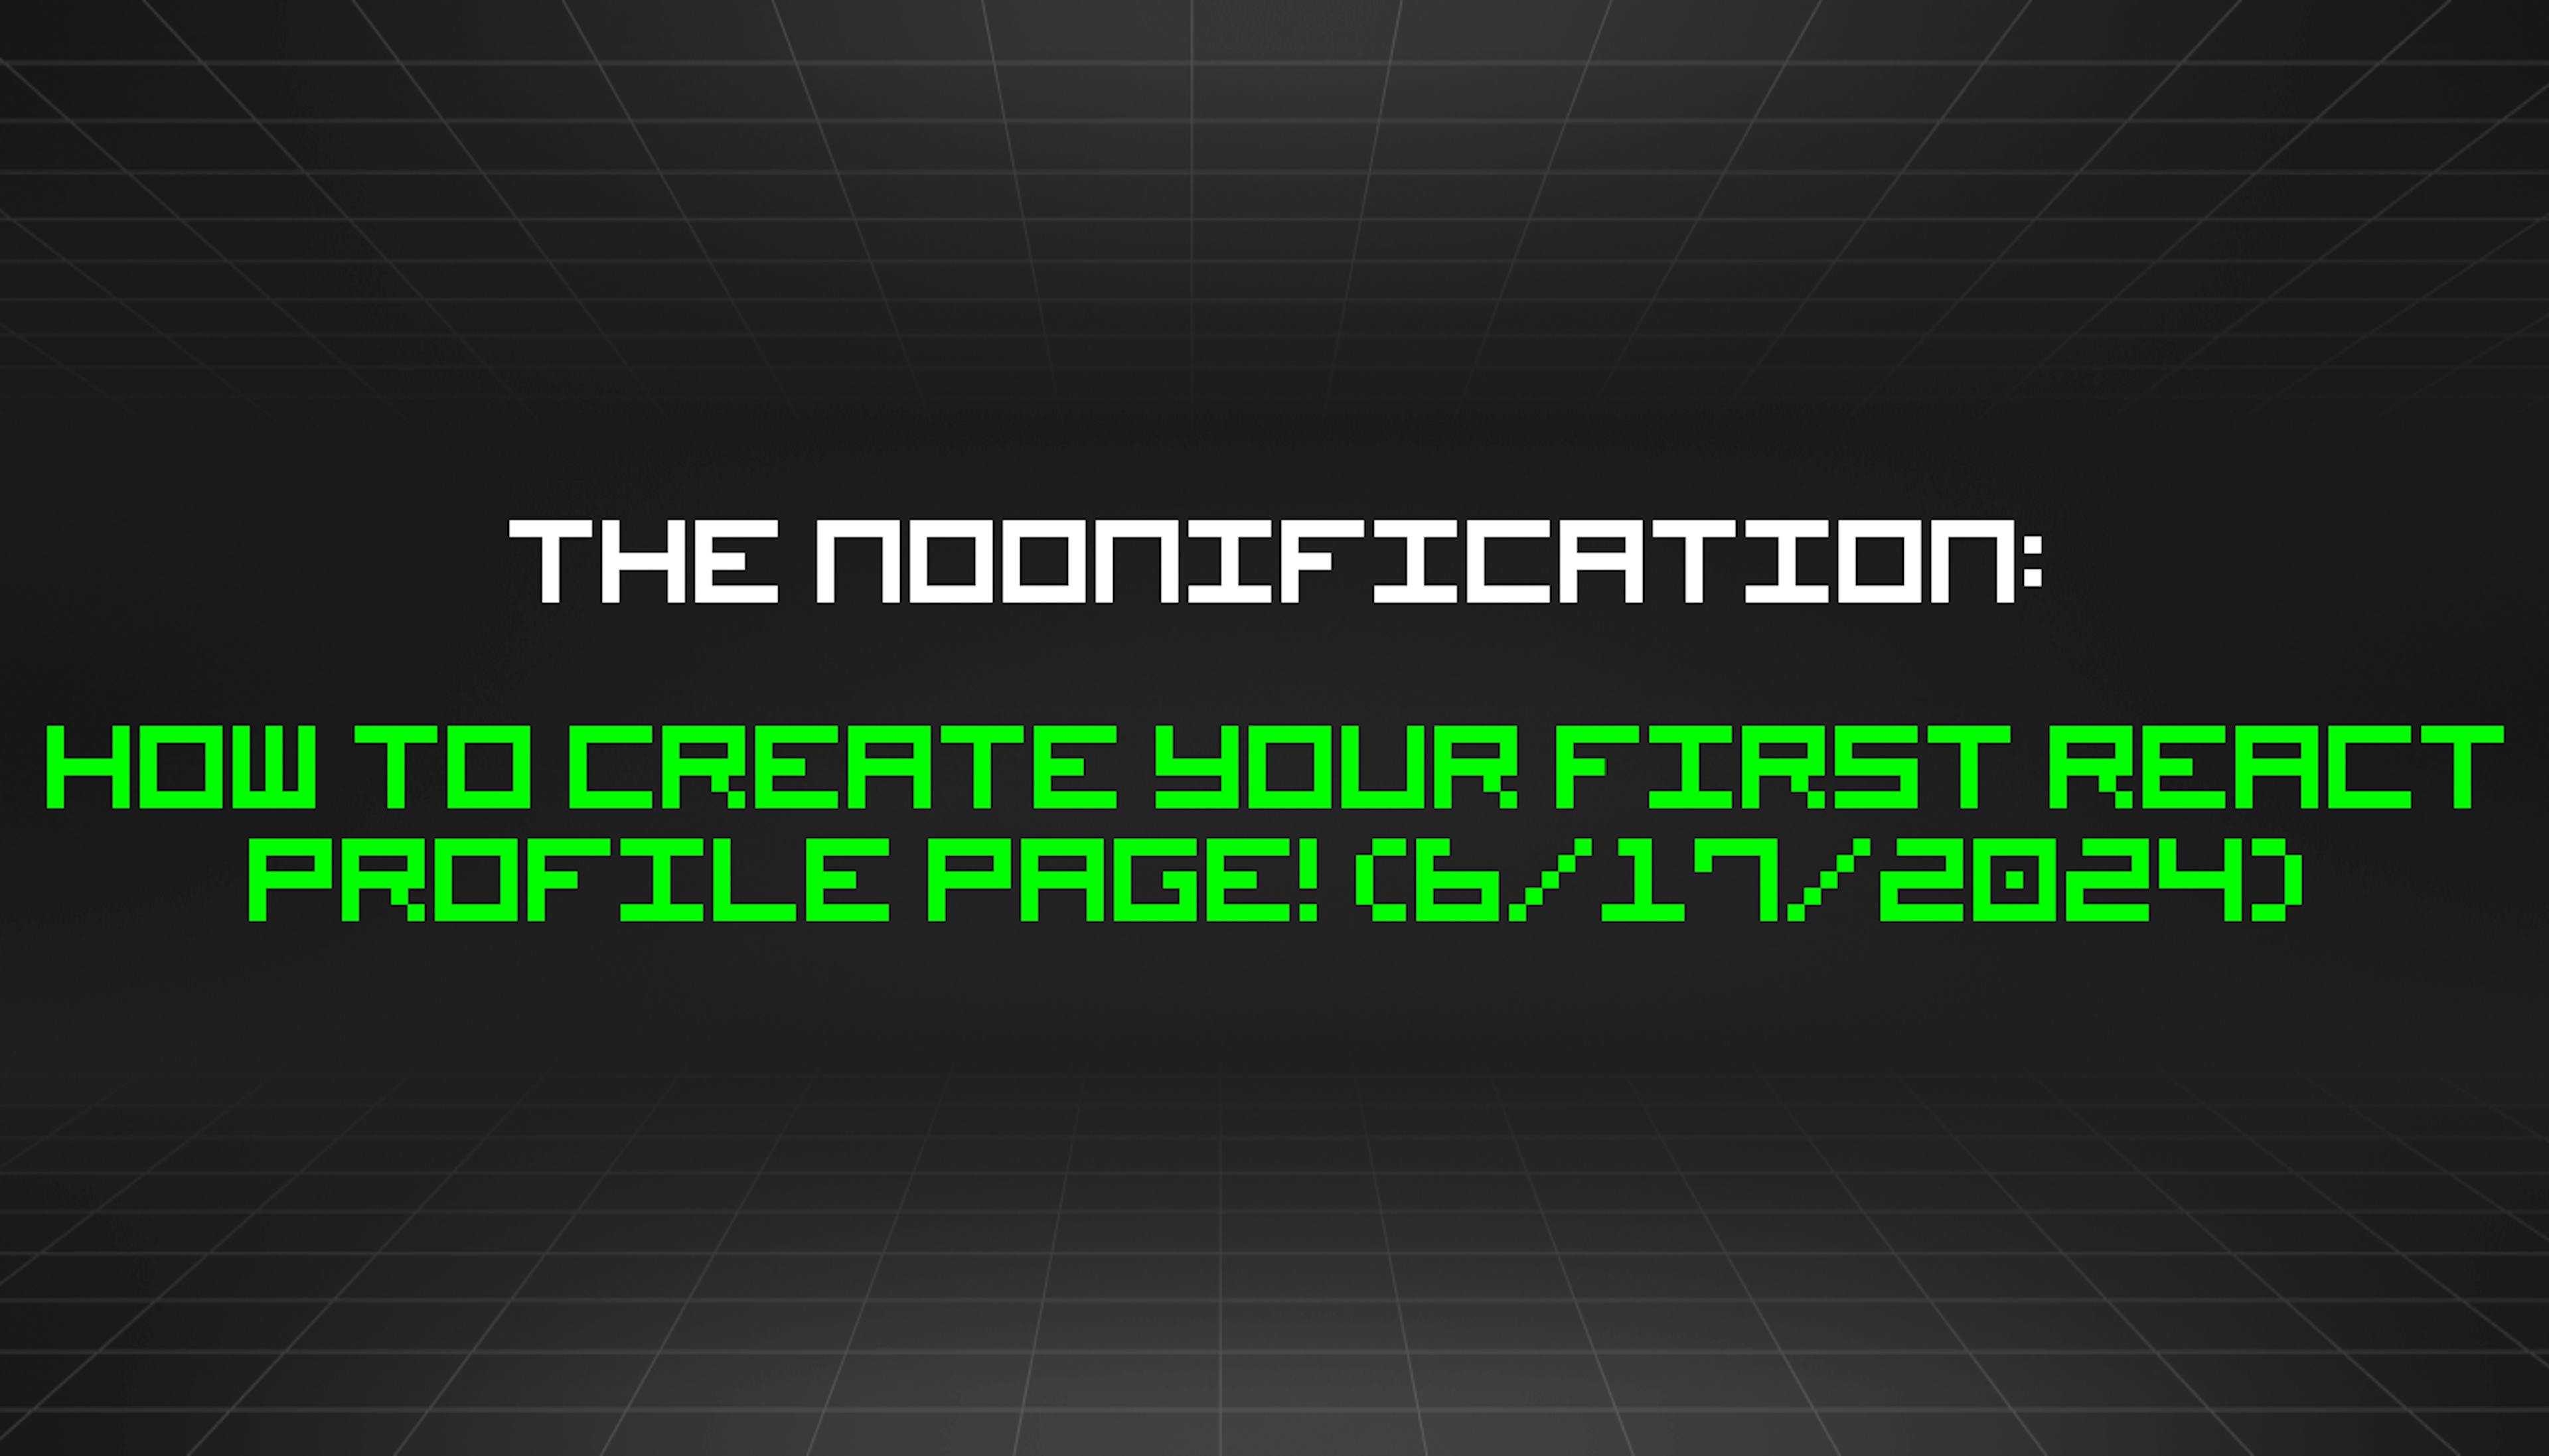 featured image - The Noonification: How to Create Your First React Profile Page! (6/17/2024)